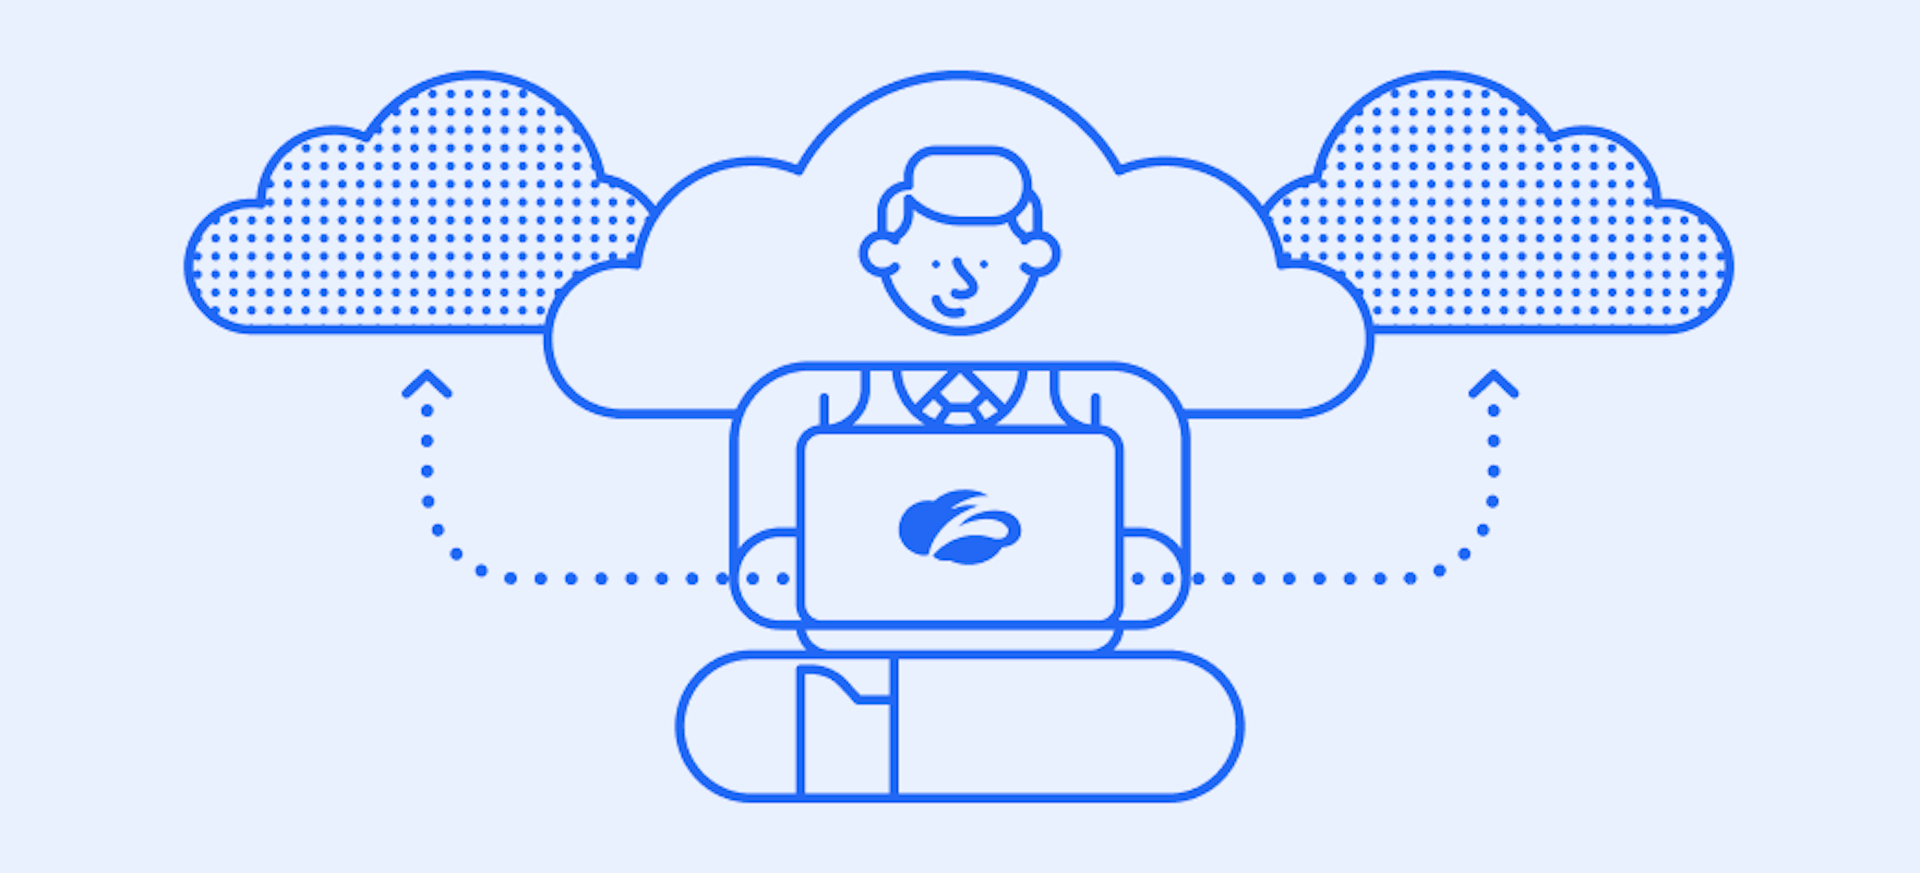 Illustration of a man working on a laptop while connecting to the cloud